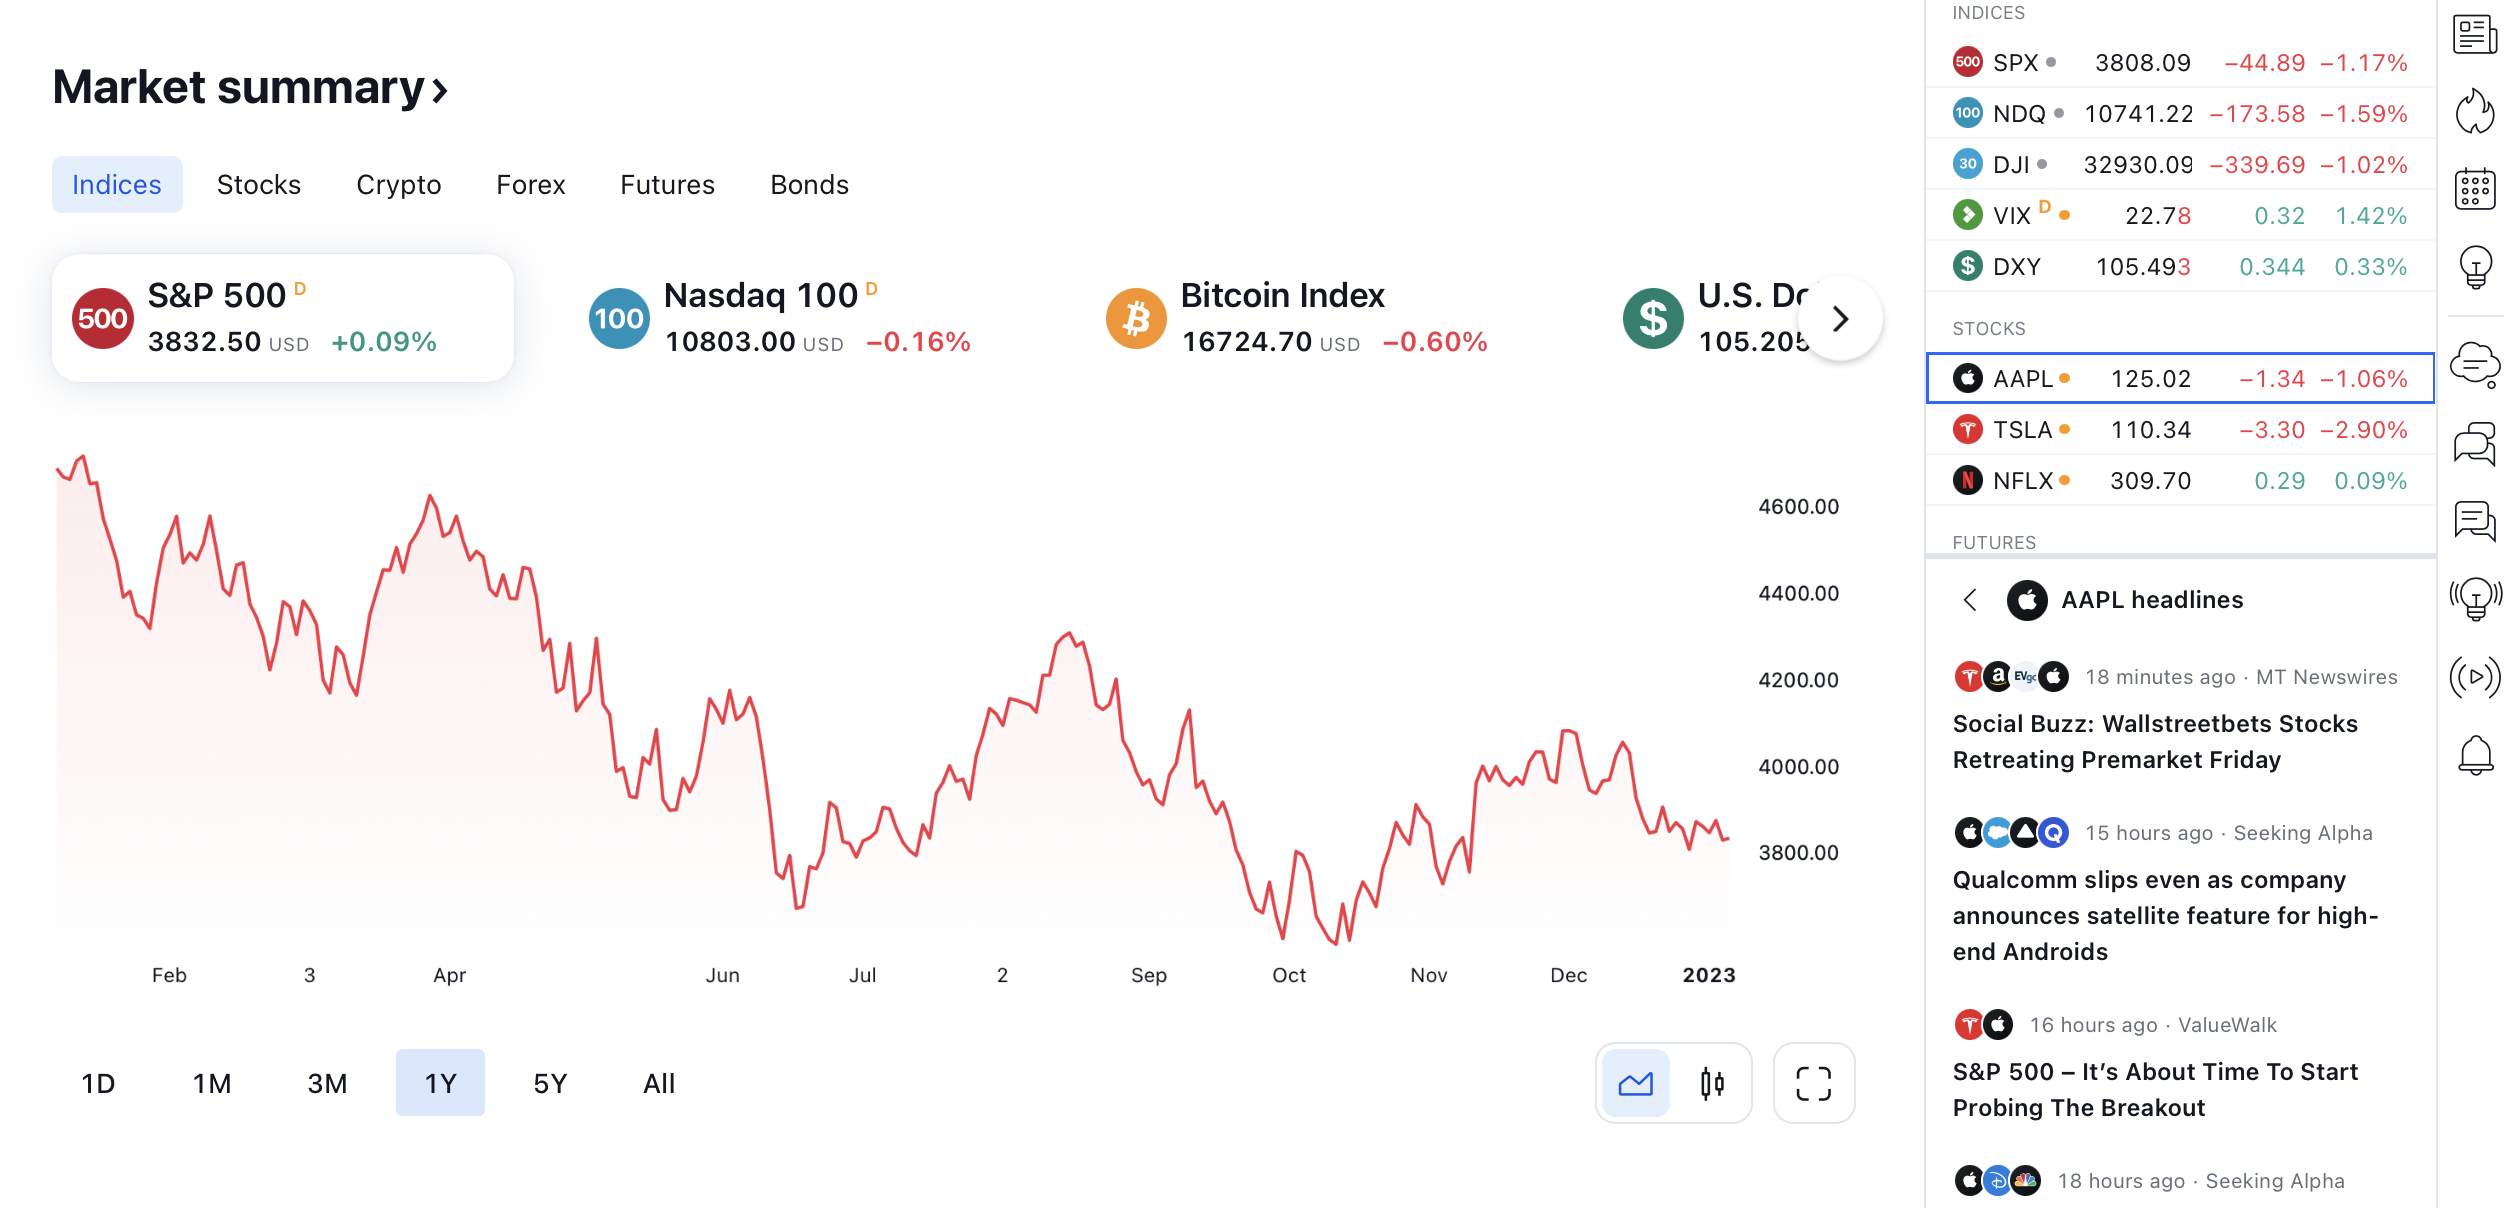 The official website of TradingView